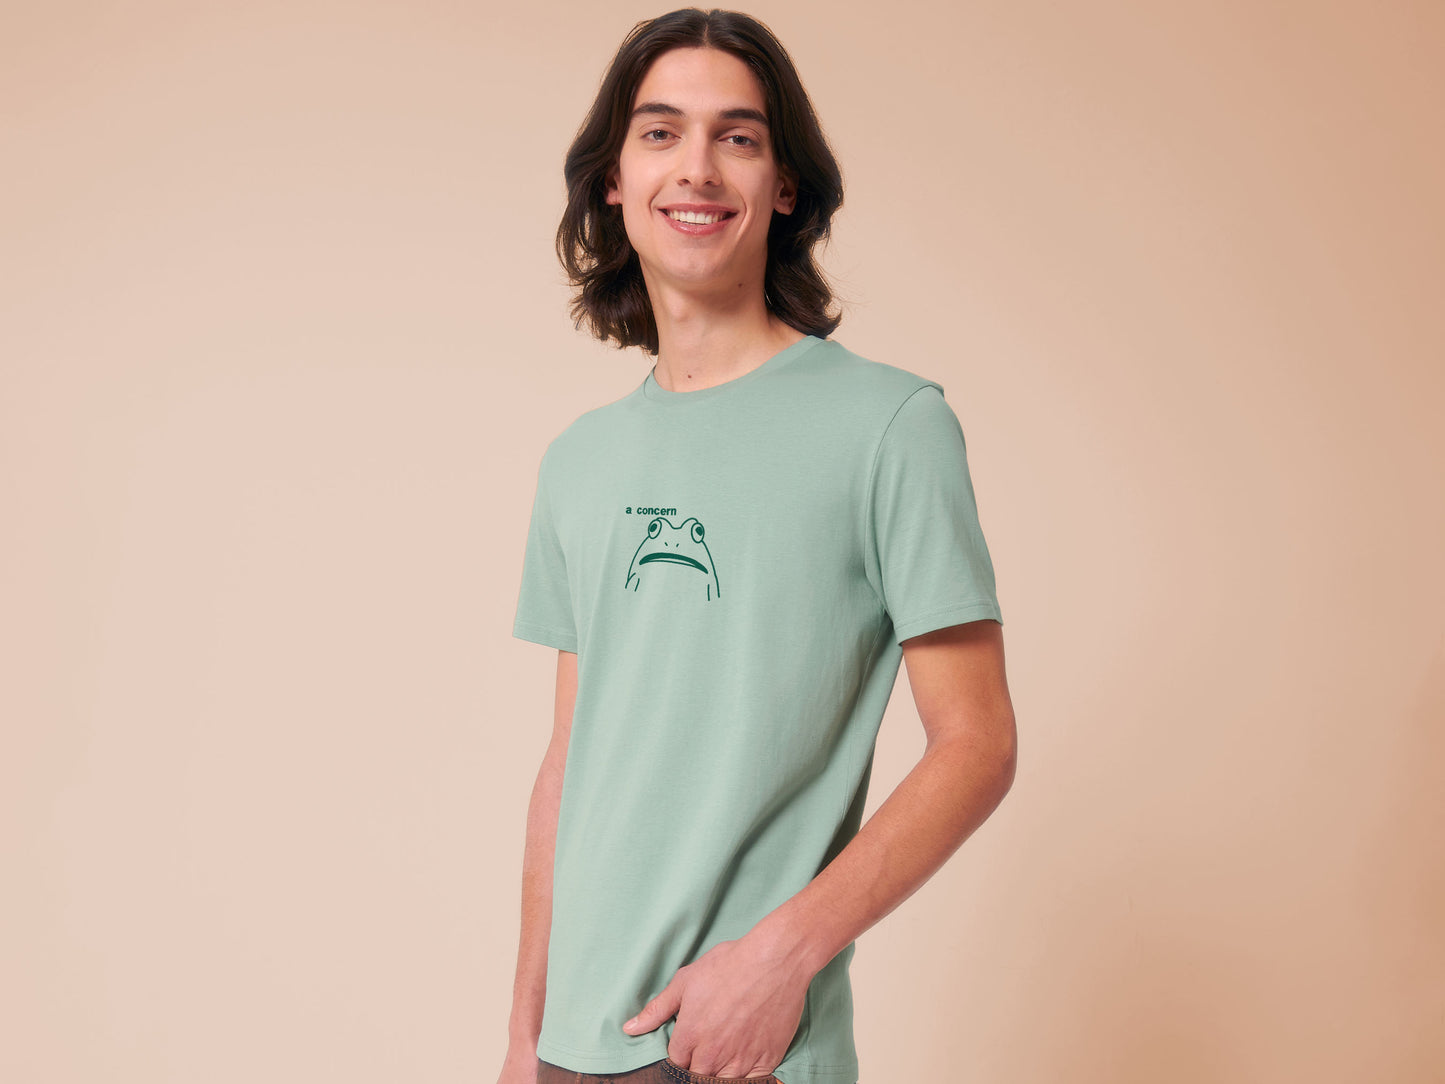 A man wearing a green crew neck short sleeve t-shirt, with an embroidered green thread design of cute confused looking frog with the text a concern.